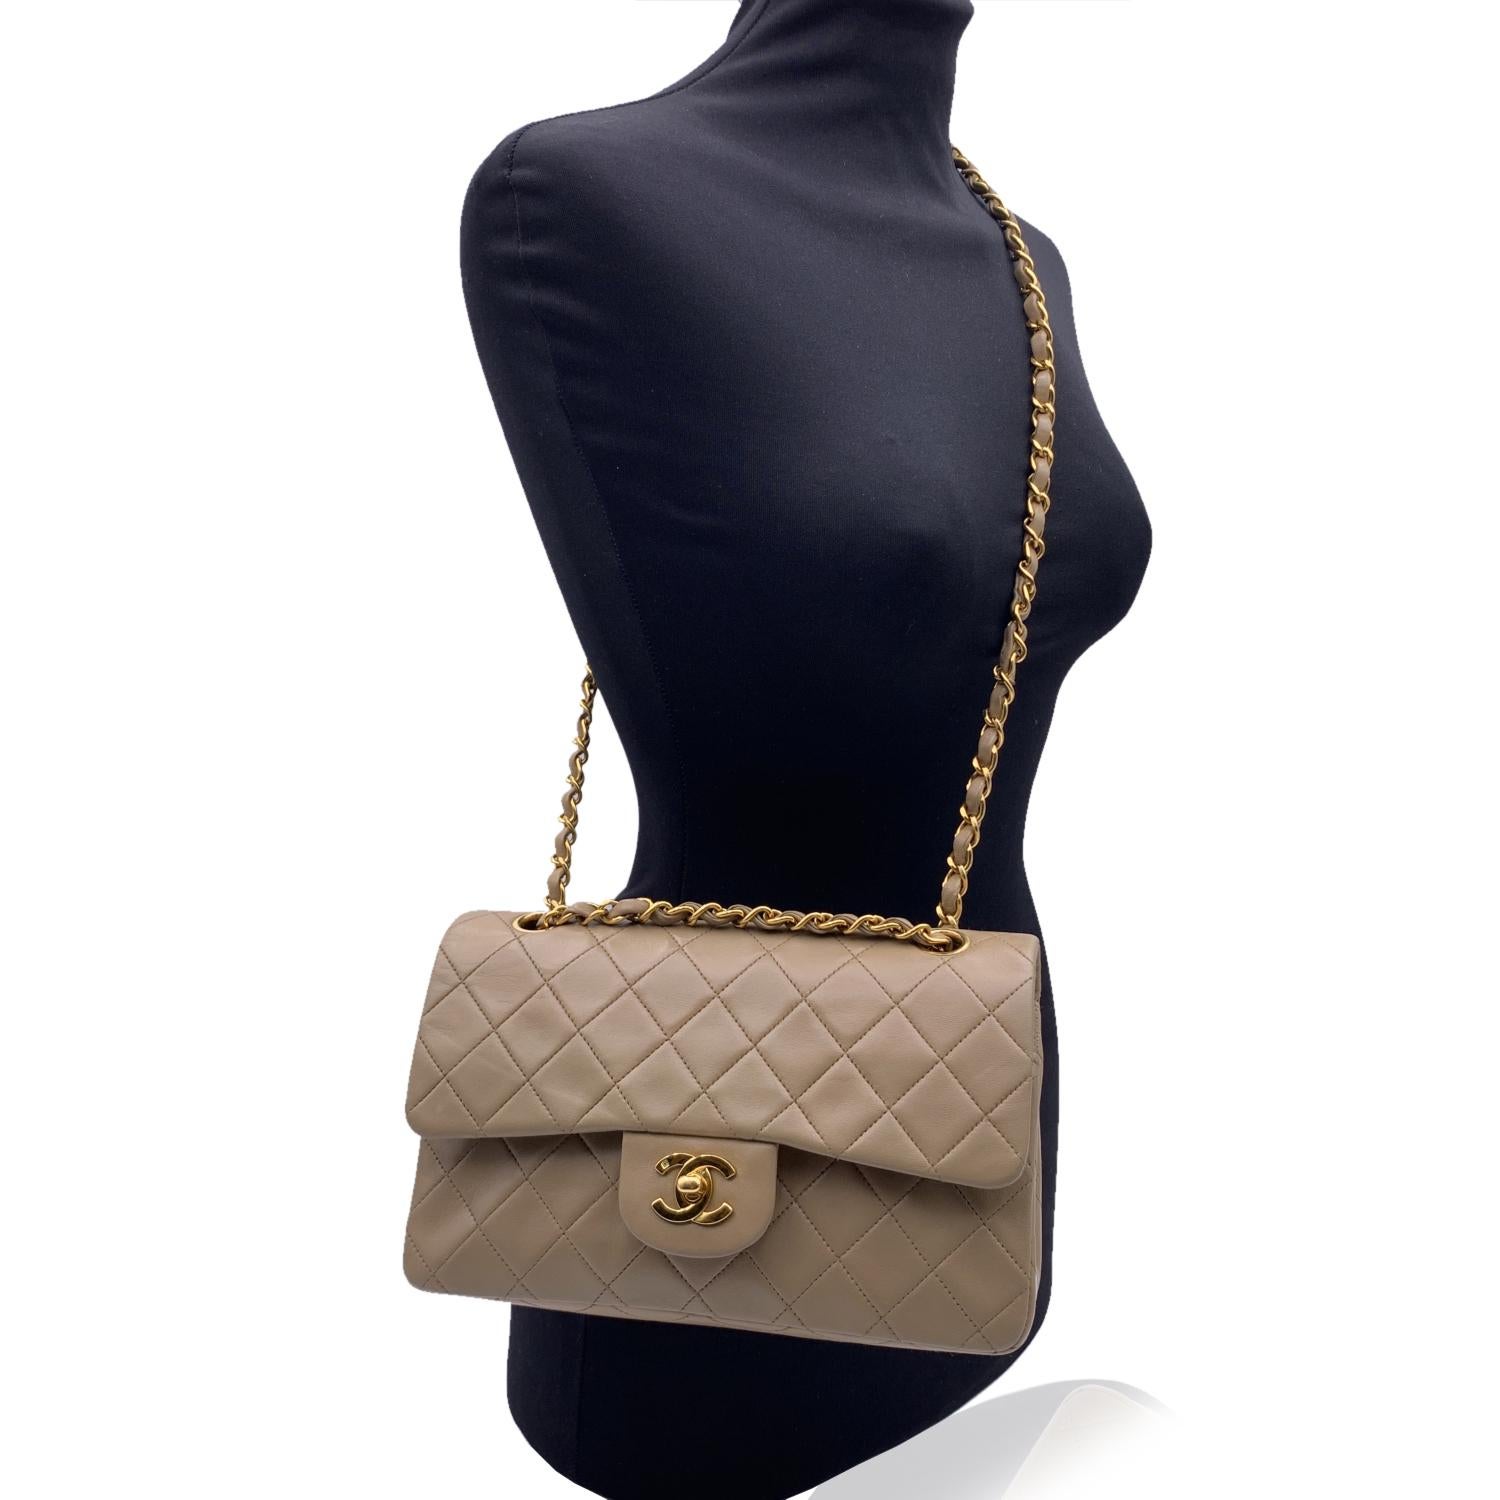 Chanel 'Timeless Classic 2.55' Quilted Double Flap 2.55 Bag in beige color. Periord/Era: 1991-1994. Features double 'CC' turn lock closure and double flap interior. 1 open pocket under the flap. Gorgeous gold metal strap with interwoven leather; can